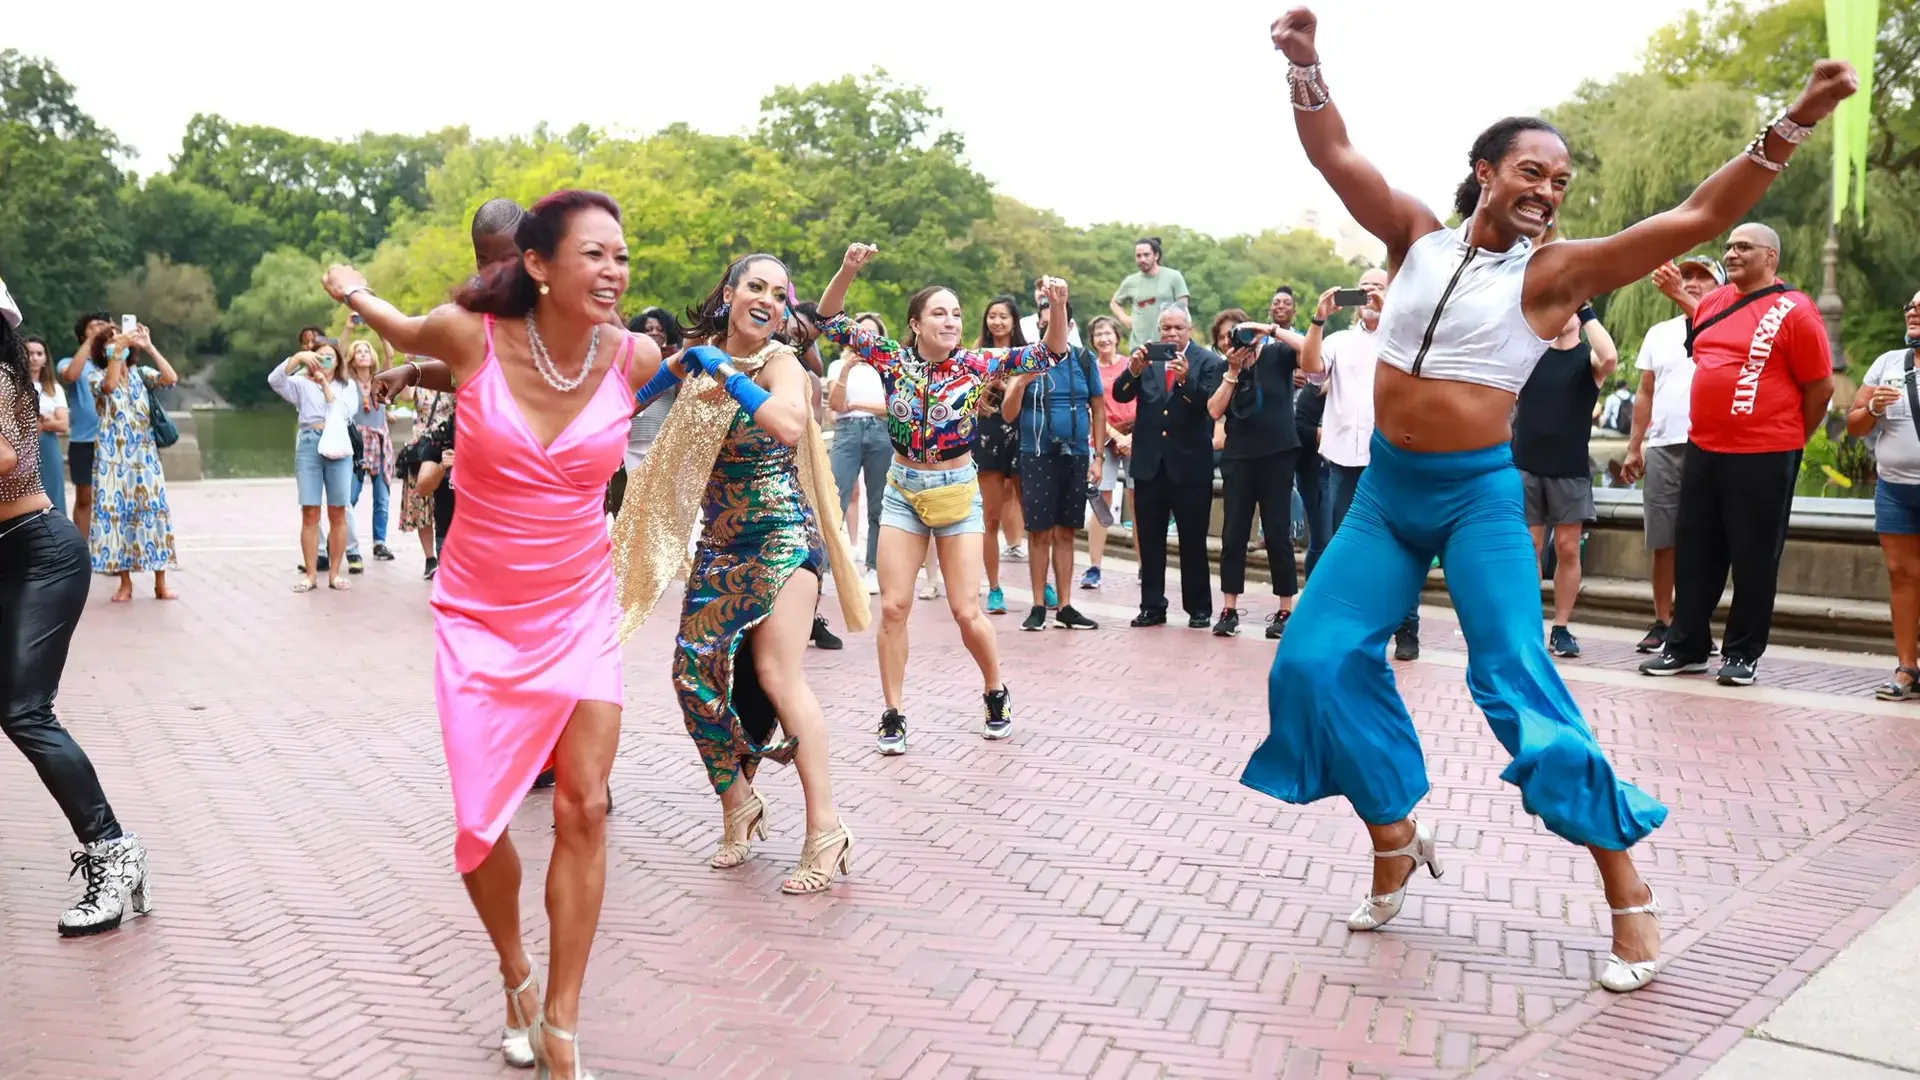 Asbury Park Dance Festival is one of the NJ Summer festivals this year.